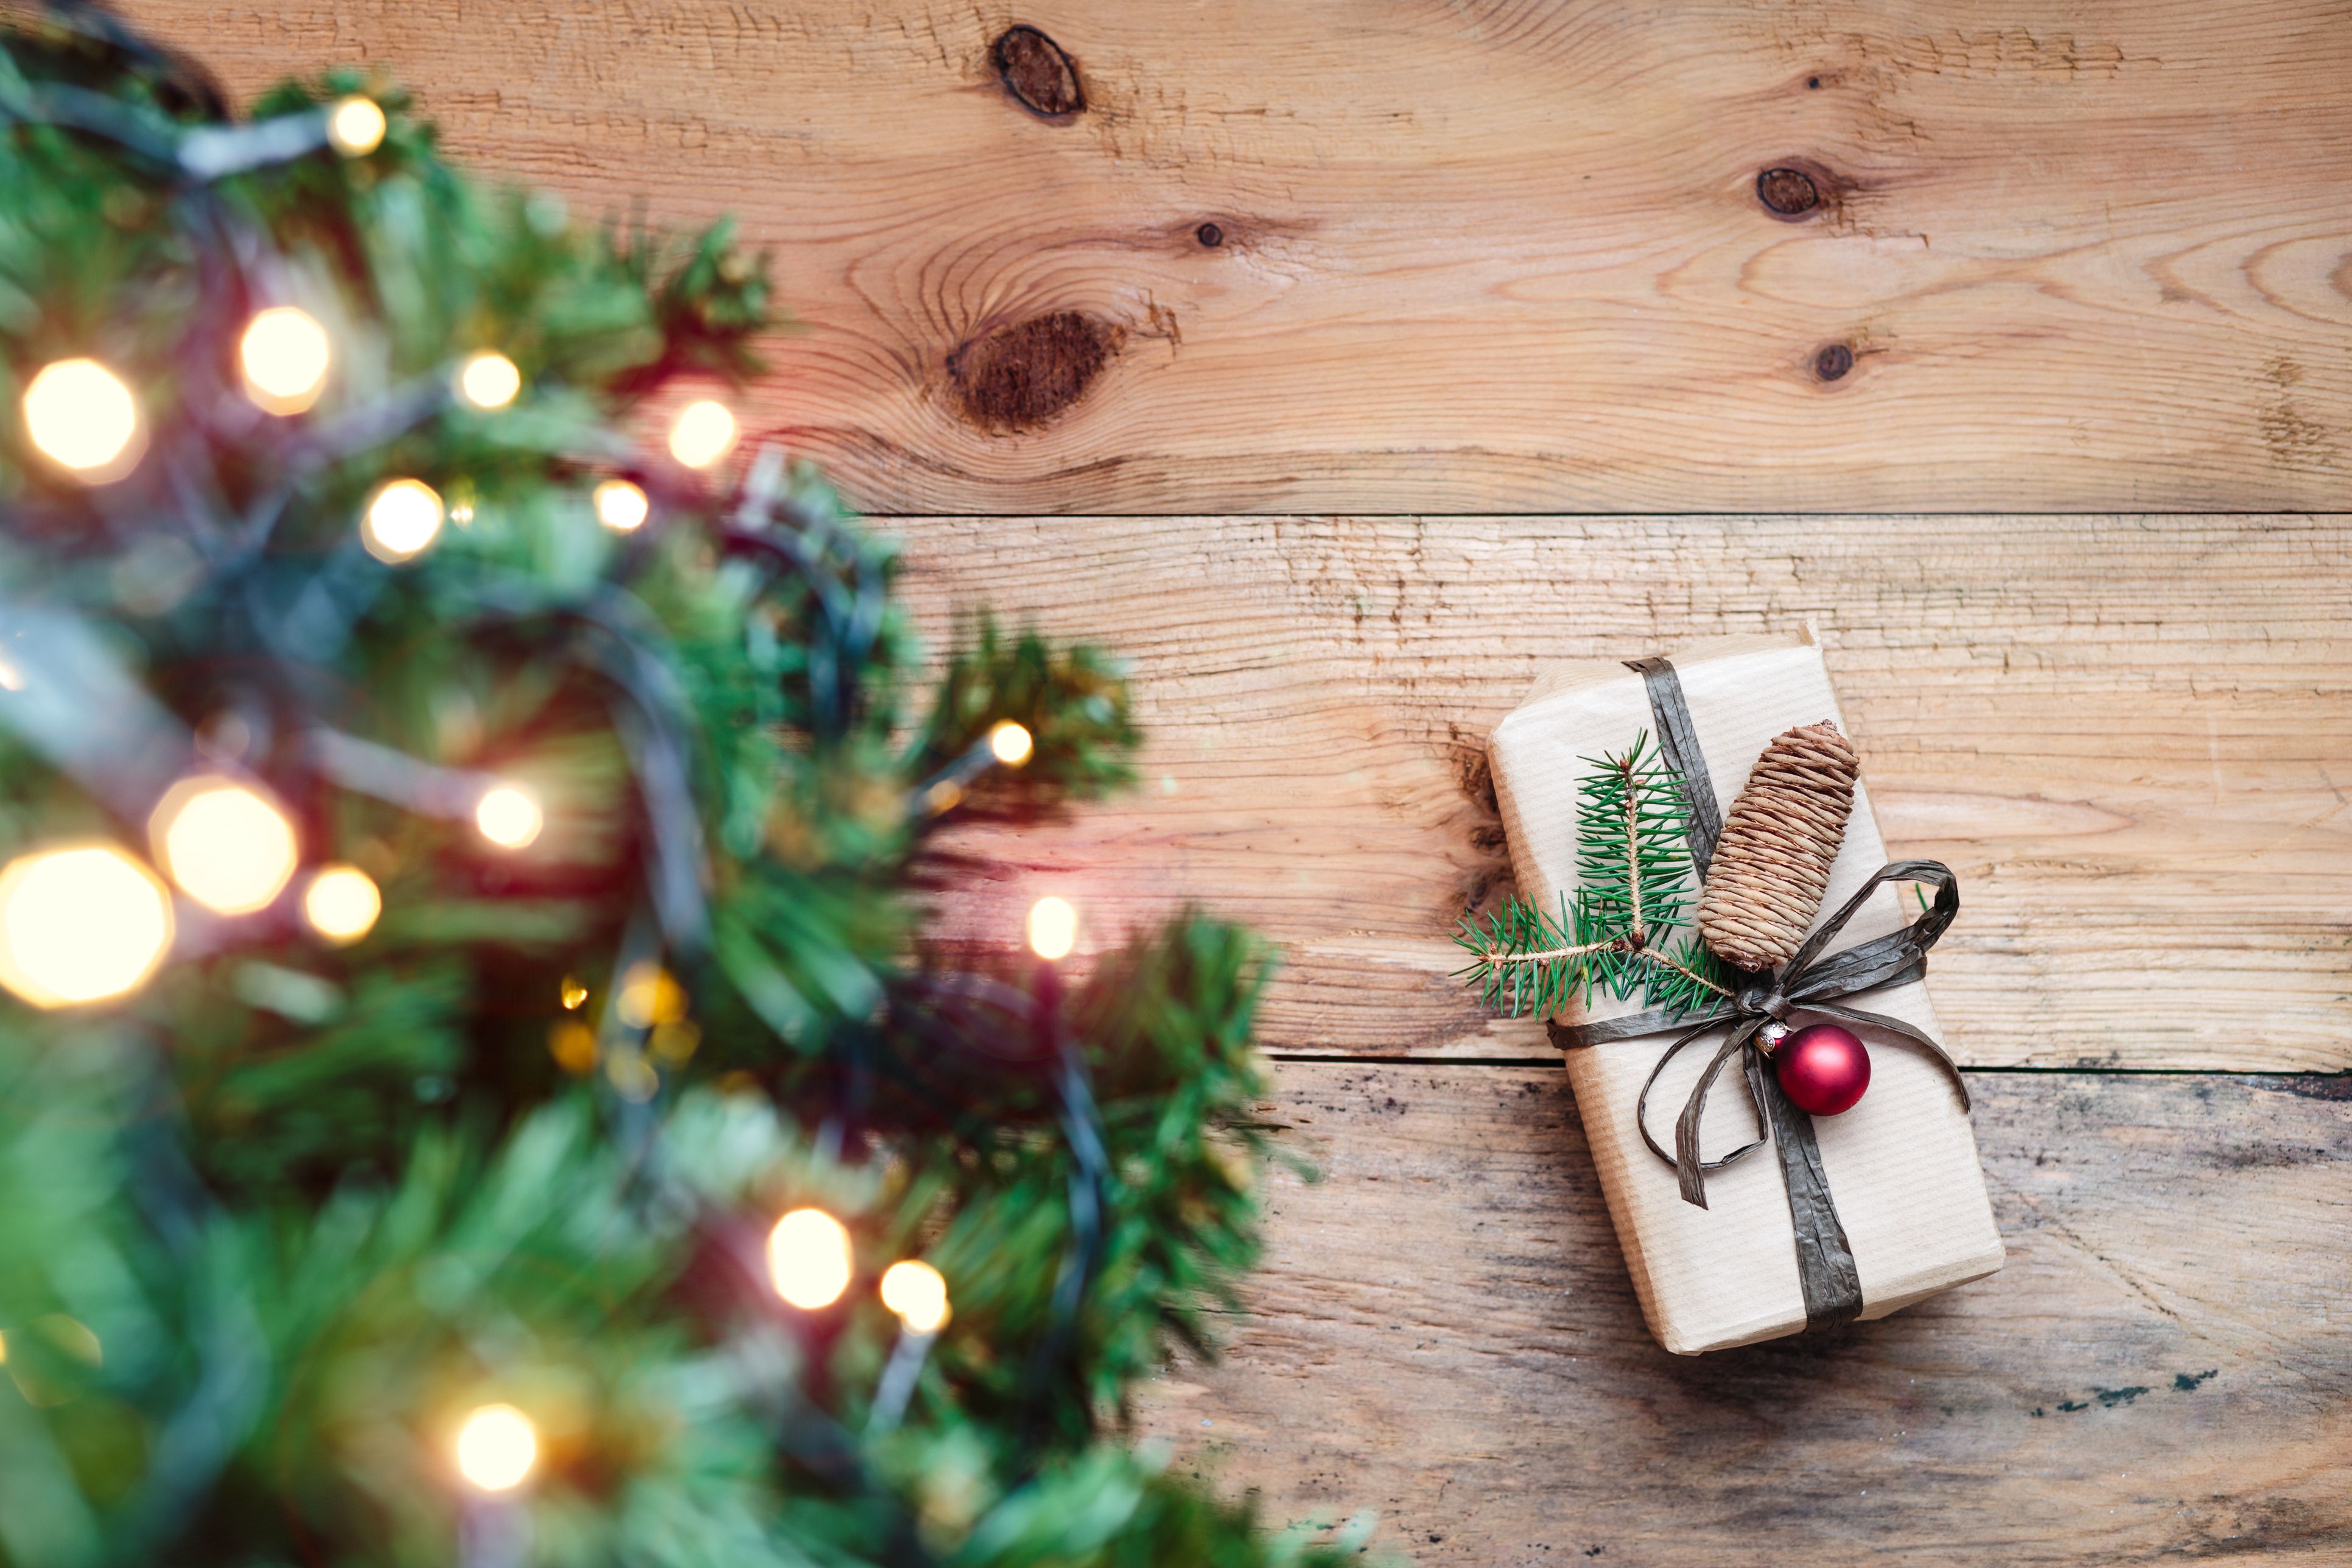 How To Have An Eco-Friendly Christmas